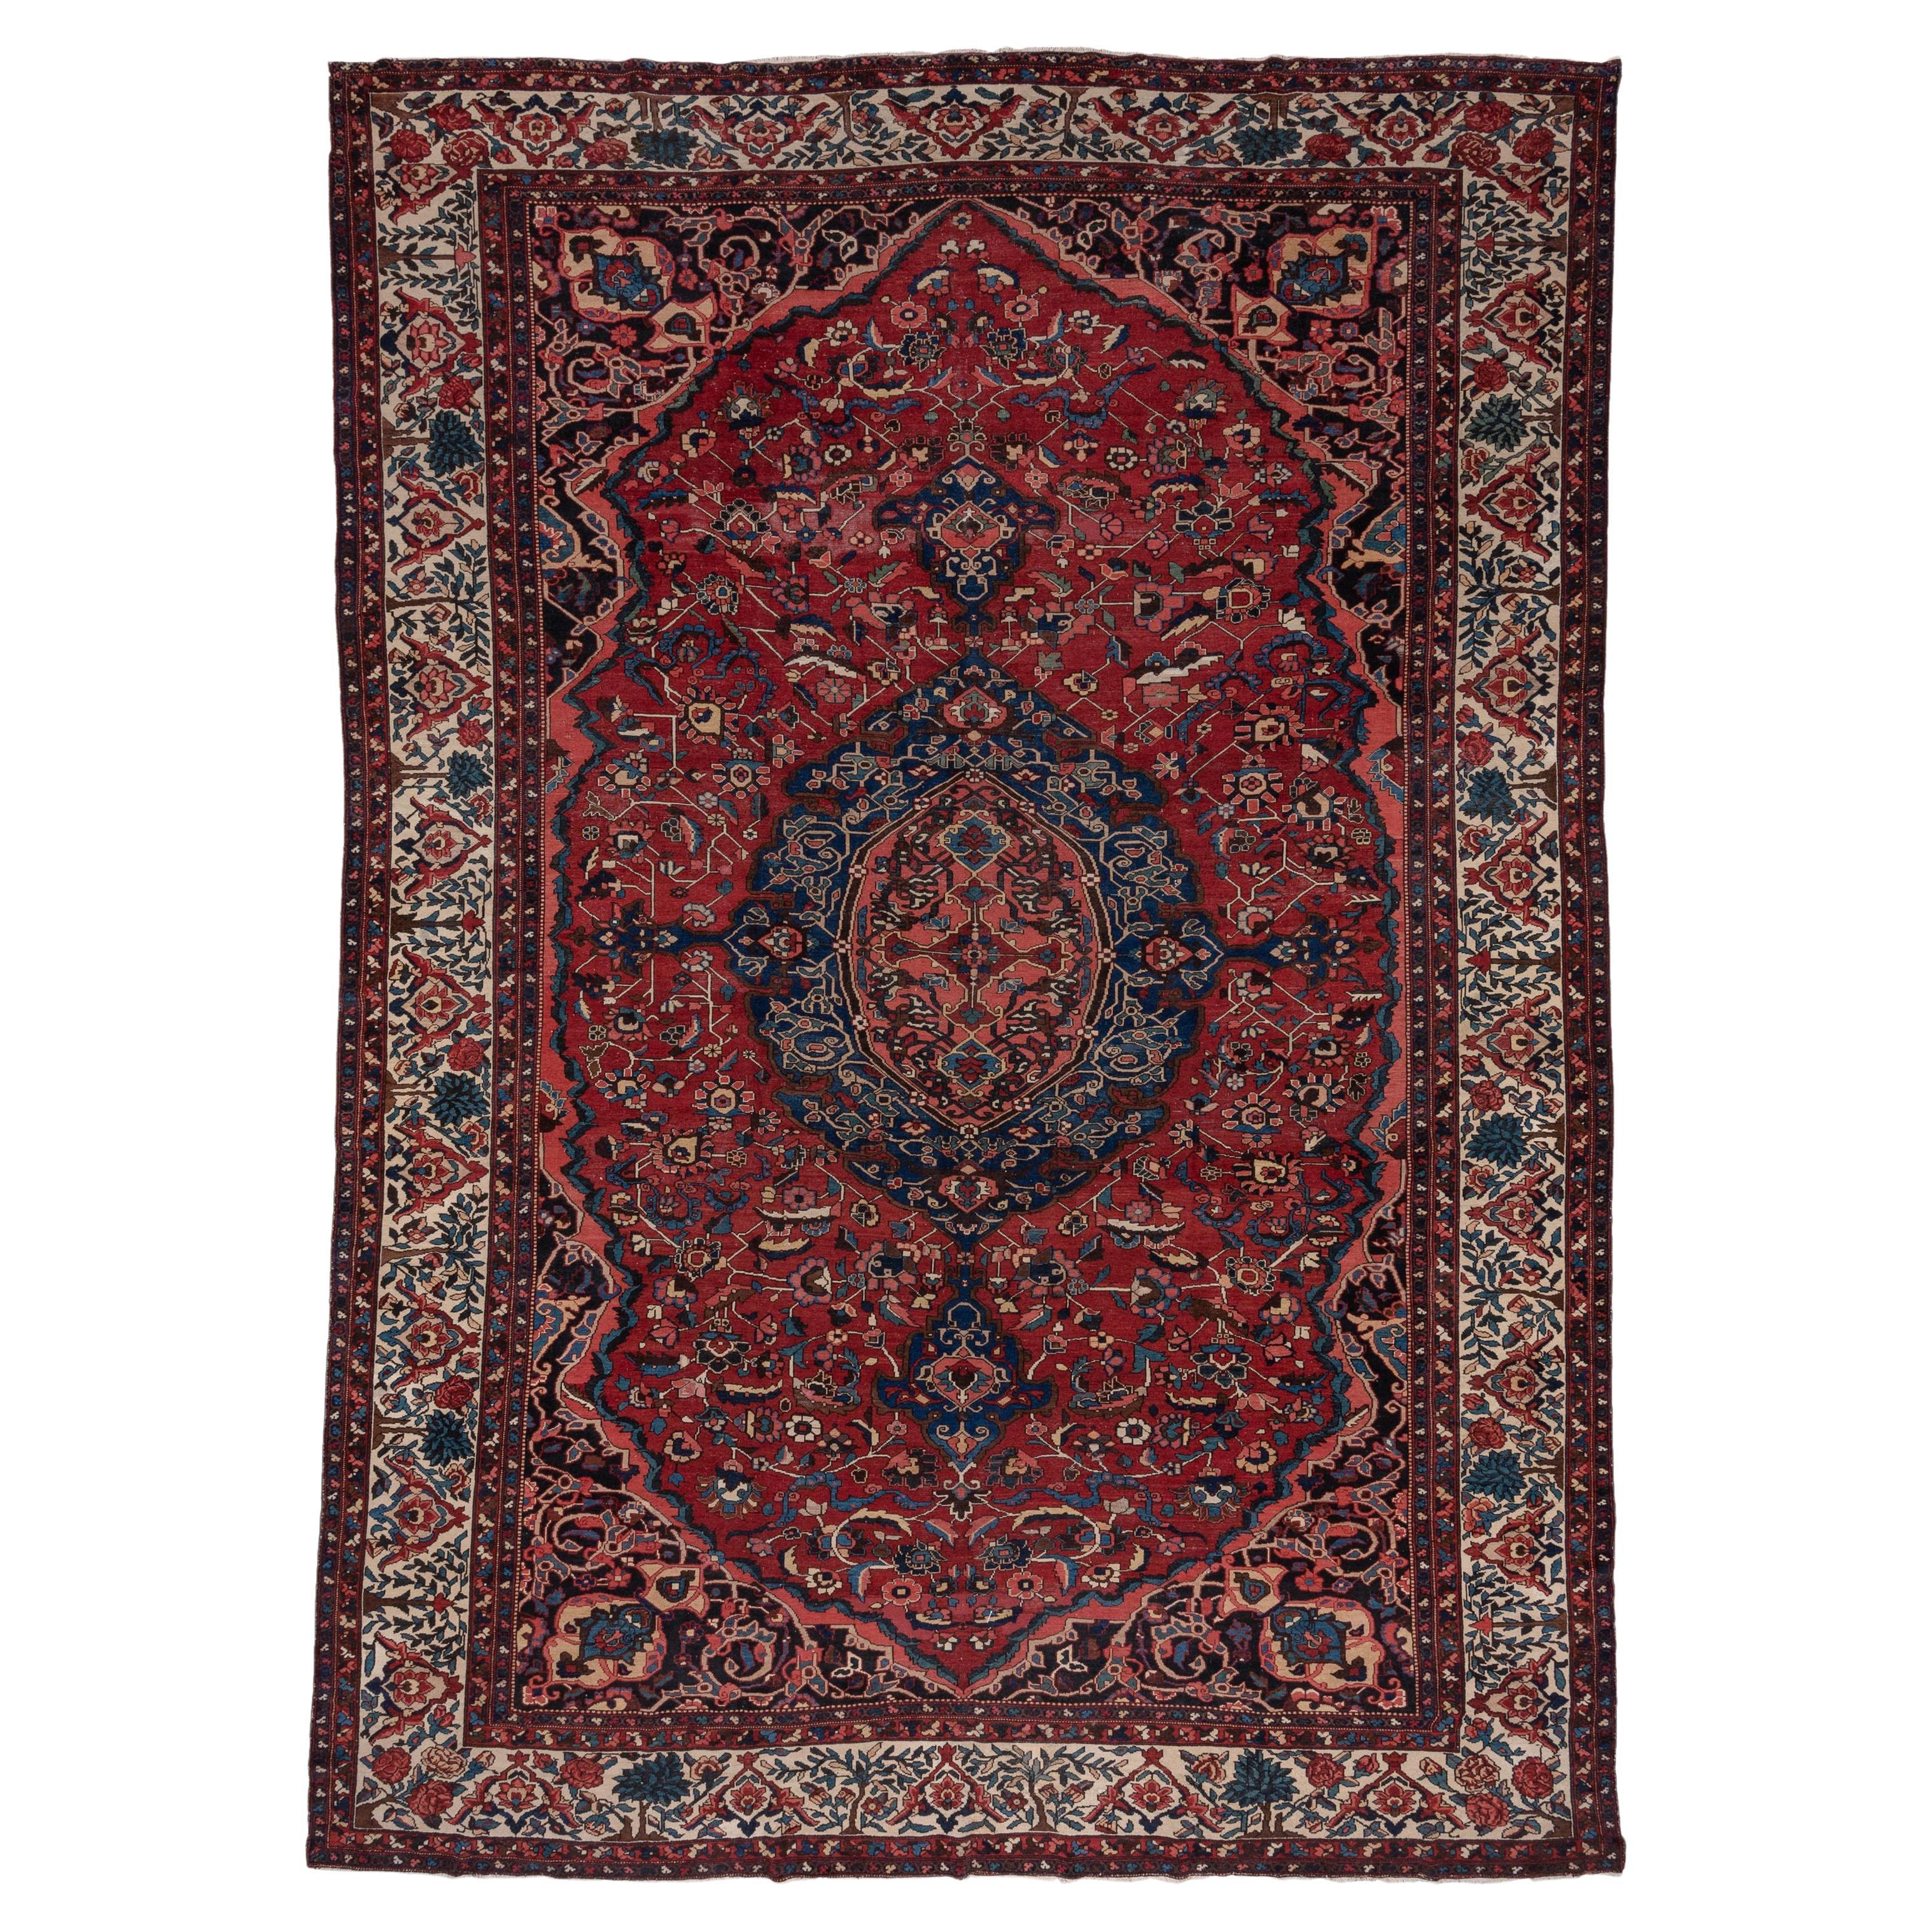 Antique Persian Baktiary Carpet, Red Field